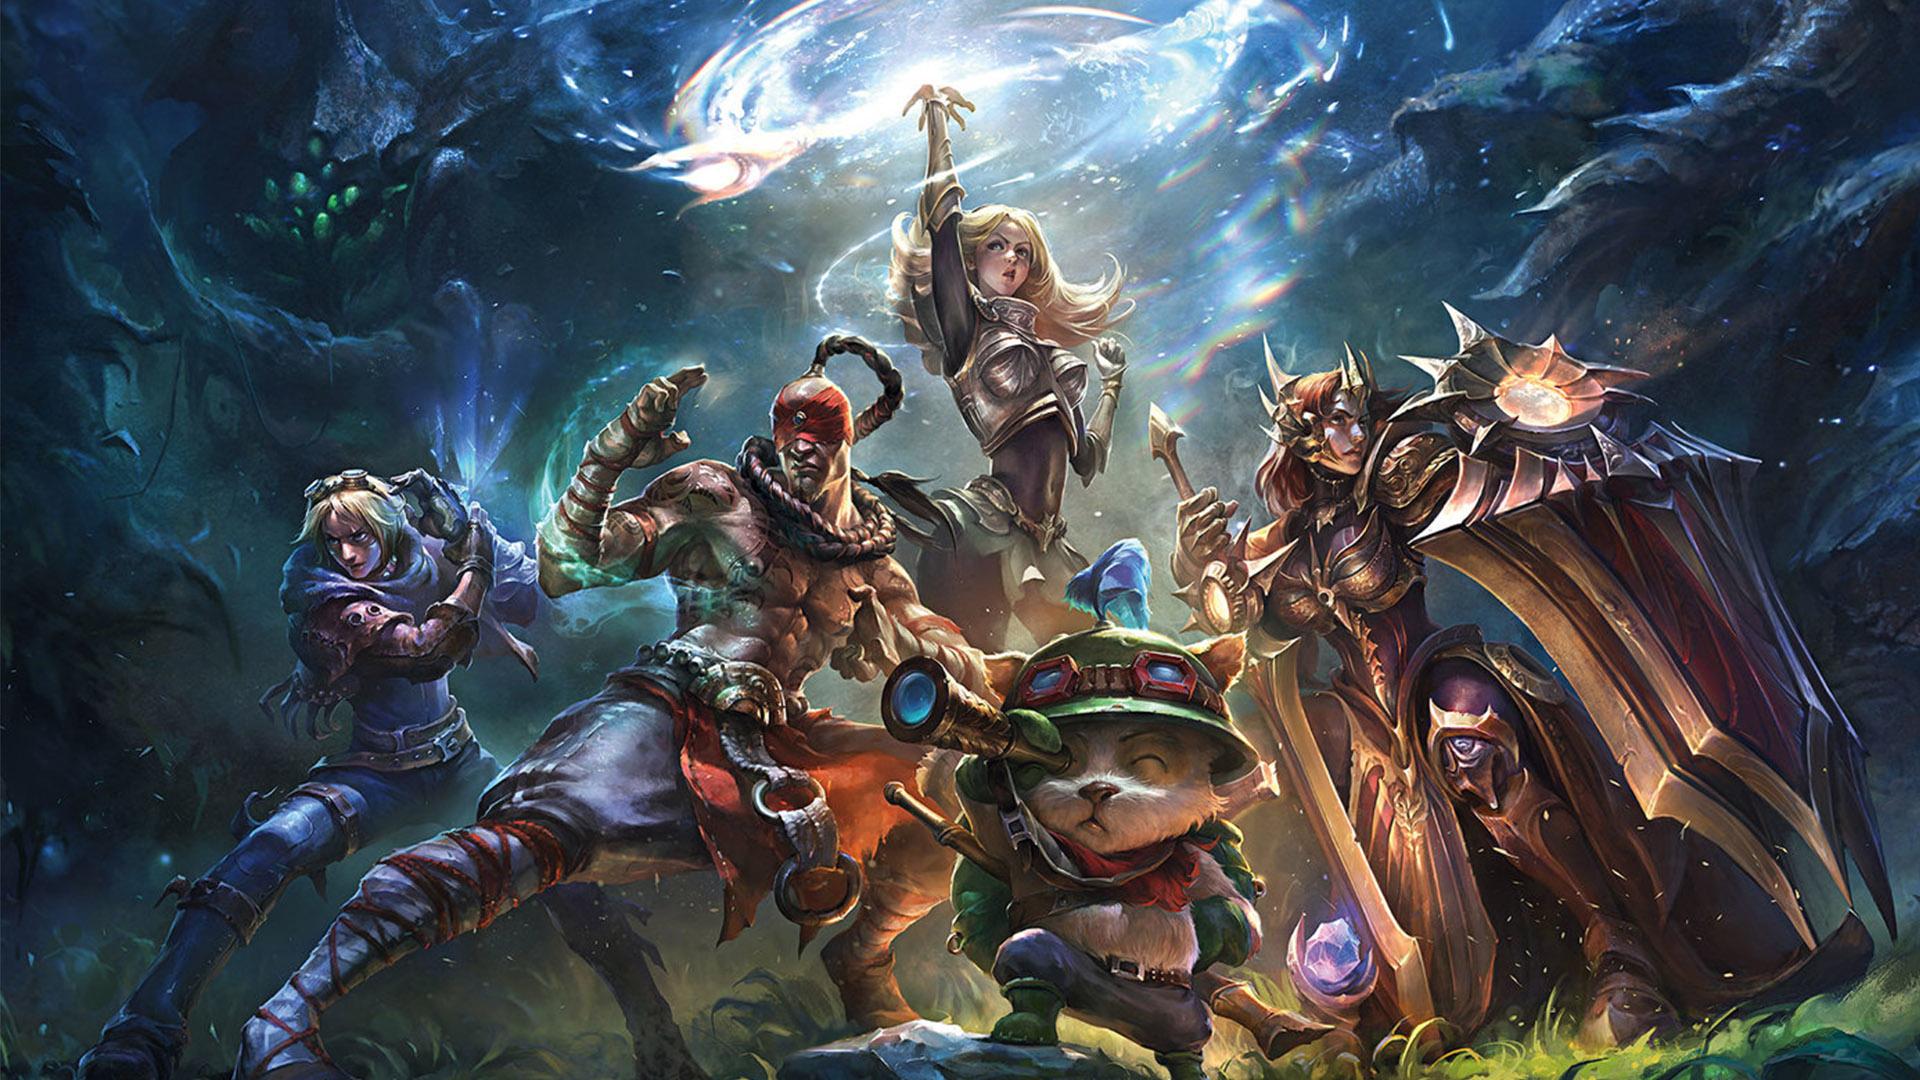 League of Legends characters standing on Summoner's Rift